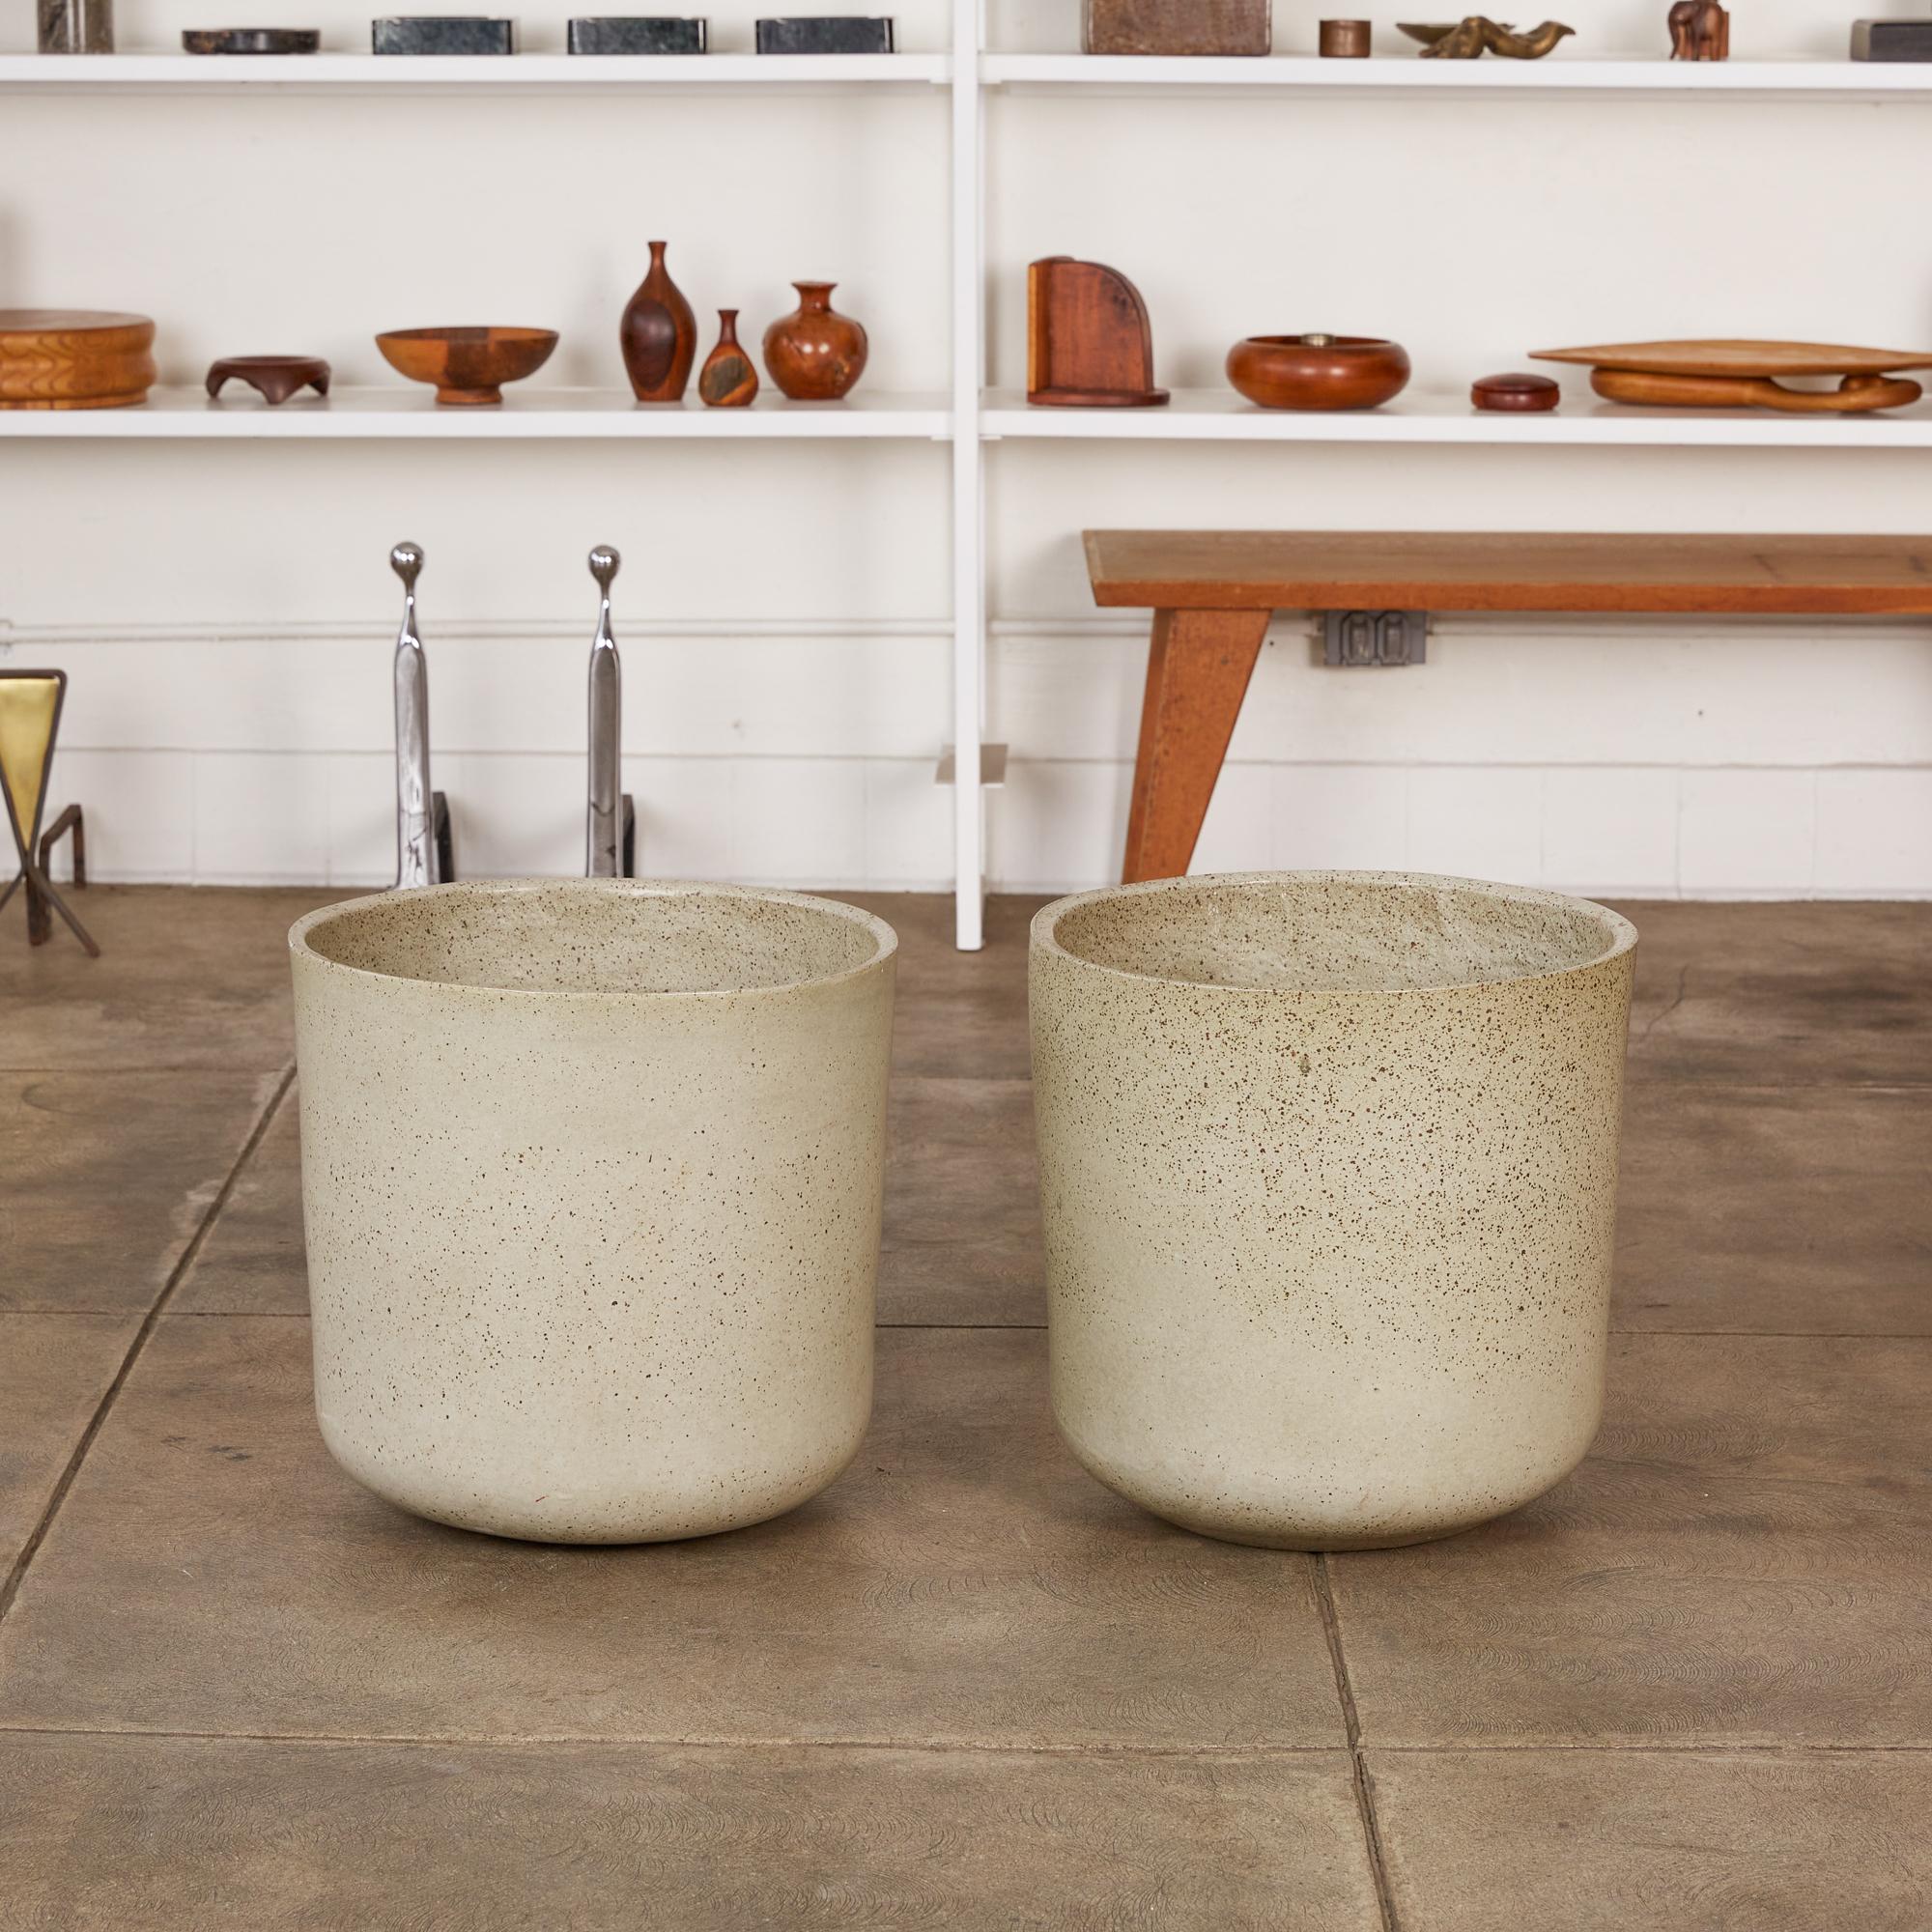 American Pair of Malcolm Leland for Architectural Pottery Planters